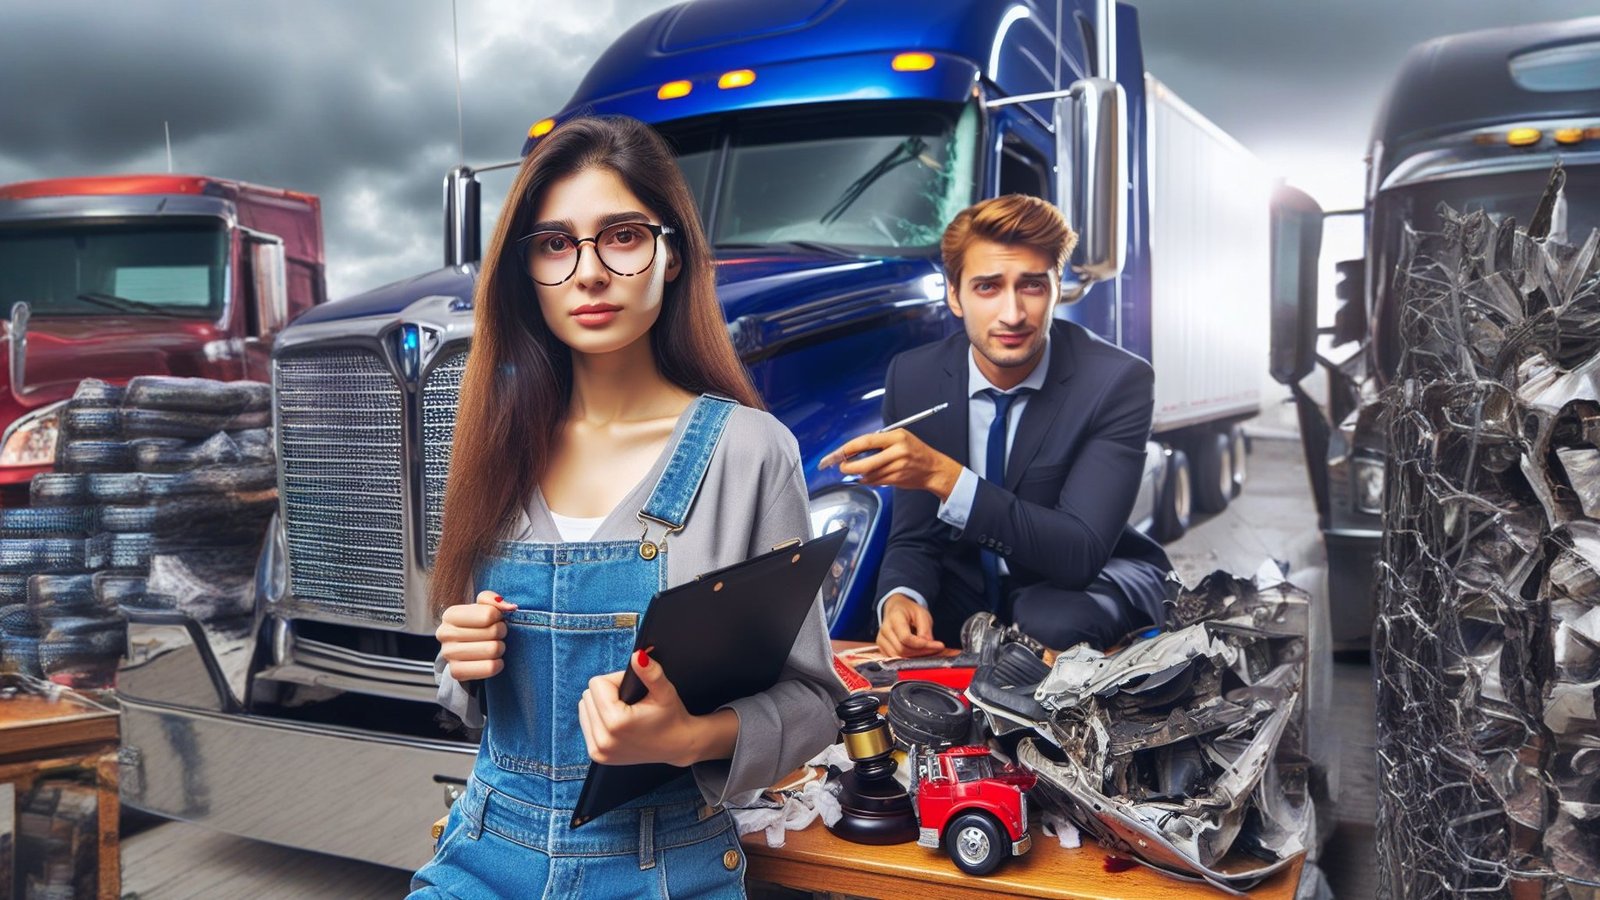 18 Wheeler Accident Attorneys Dallas: Seeking Justice After a Tragic Incident